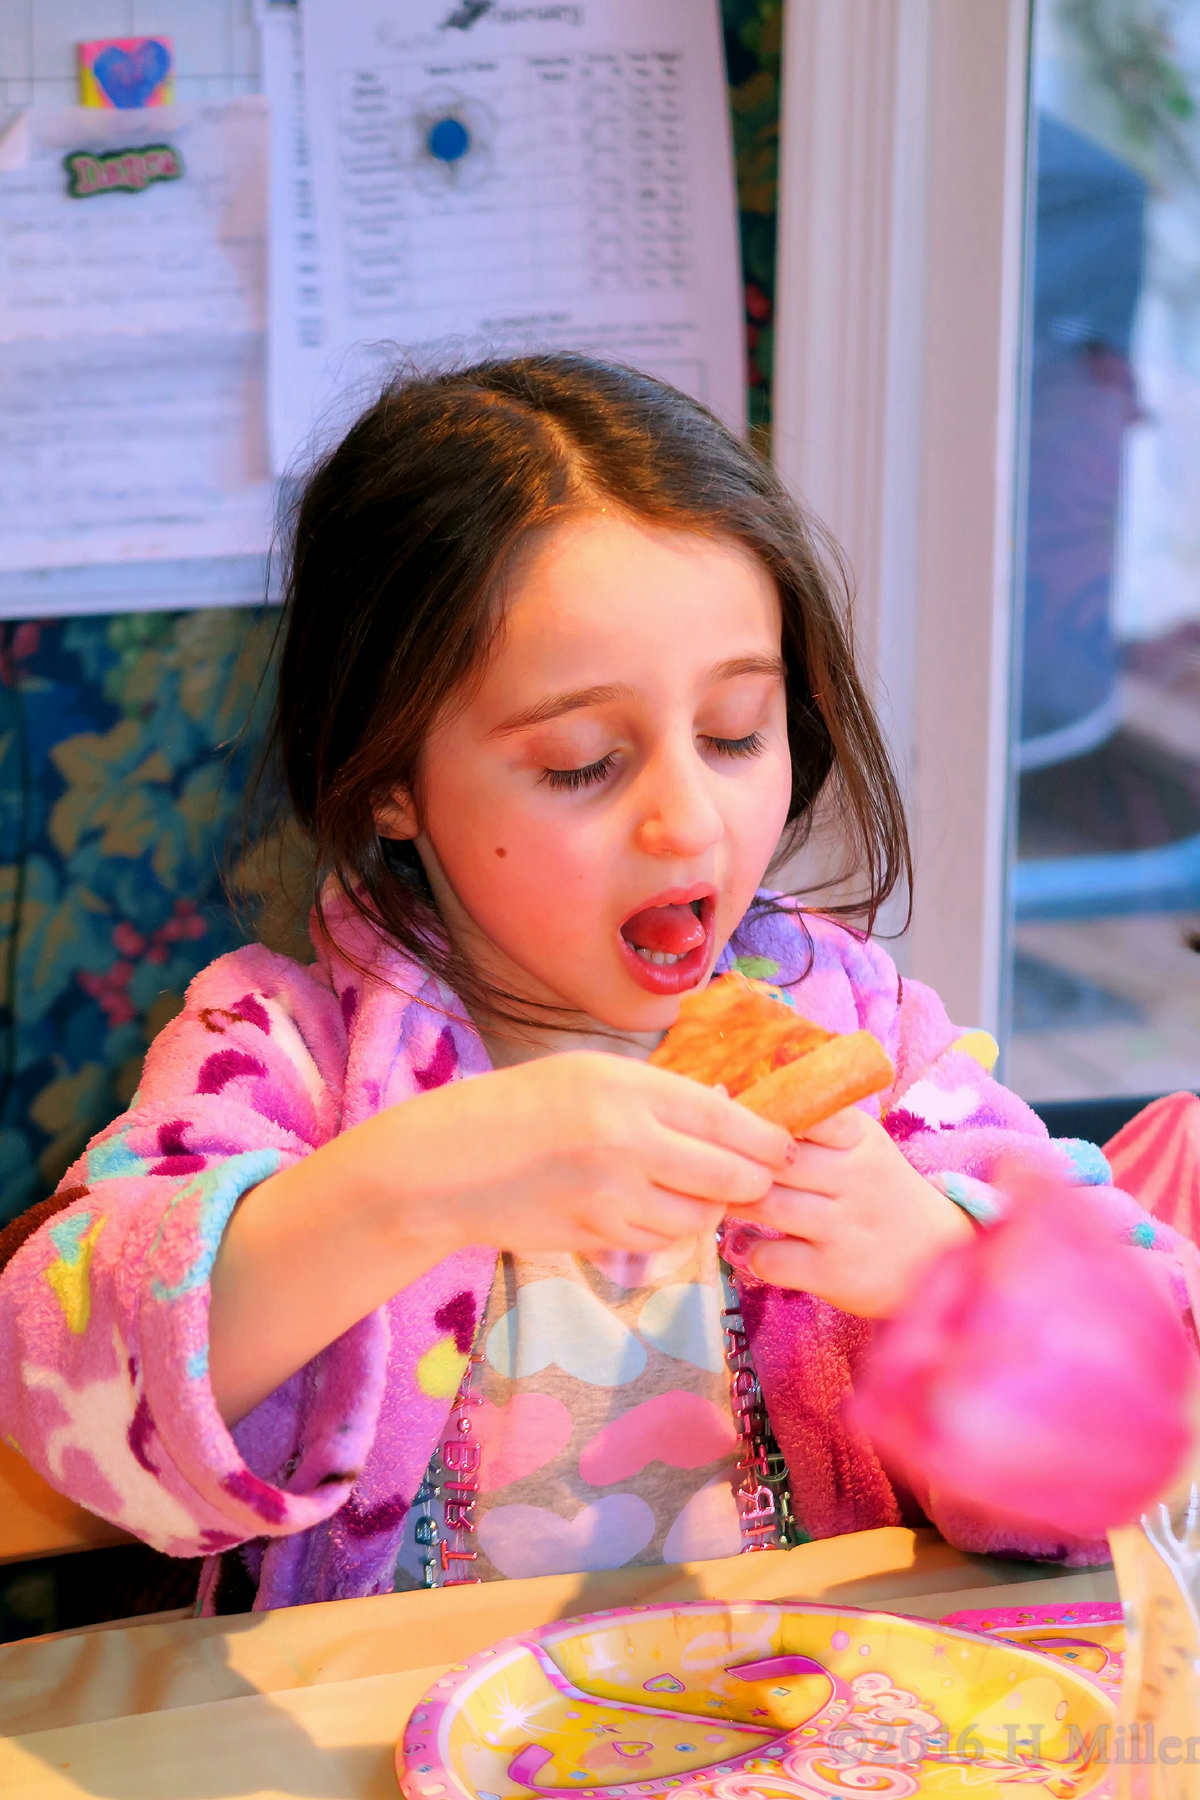 Pizza Is Even More Delicious At The Spa Party For Girls! 